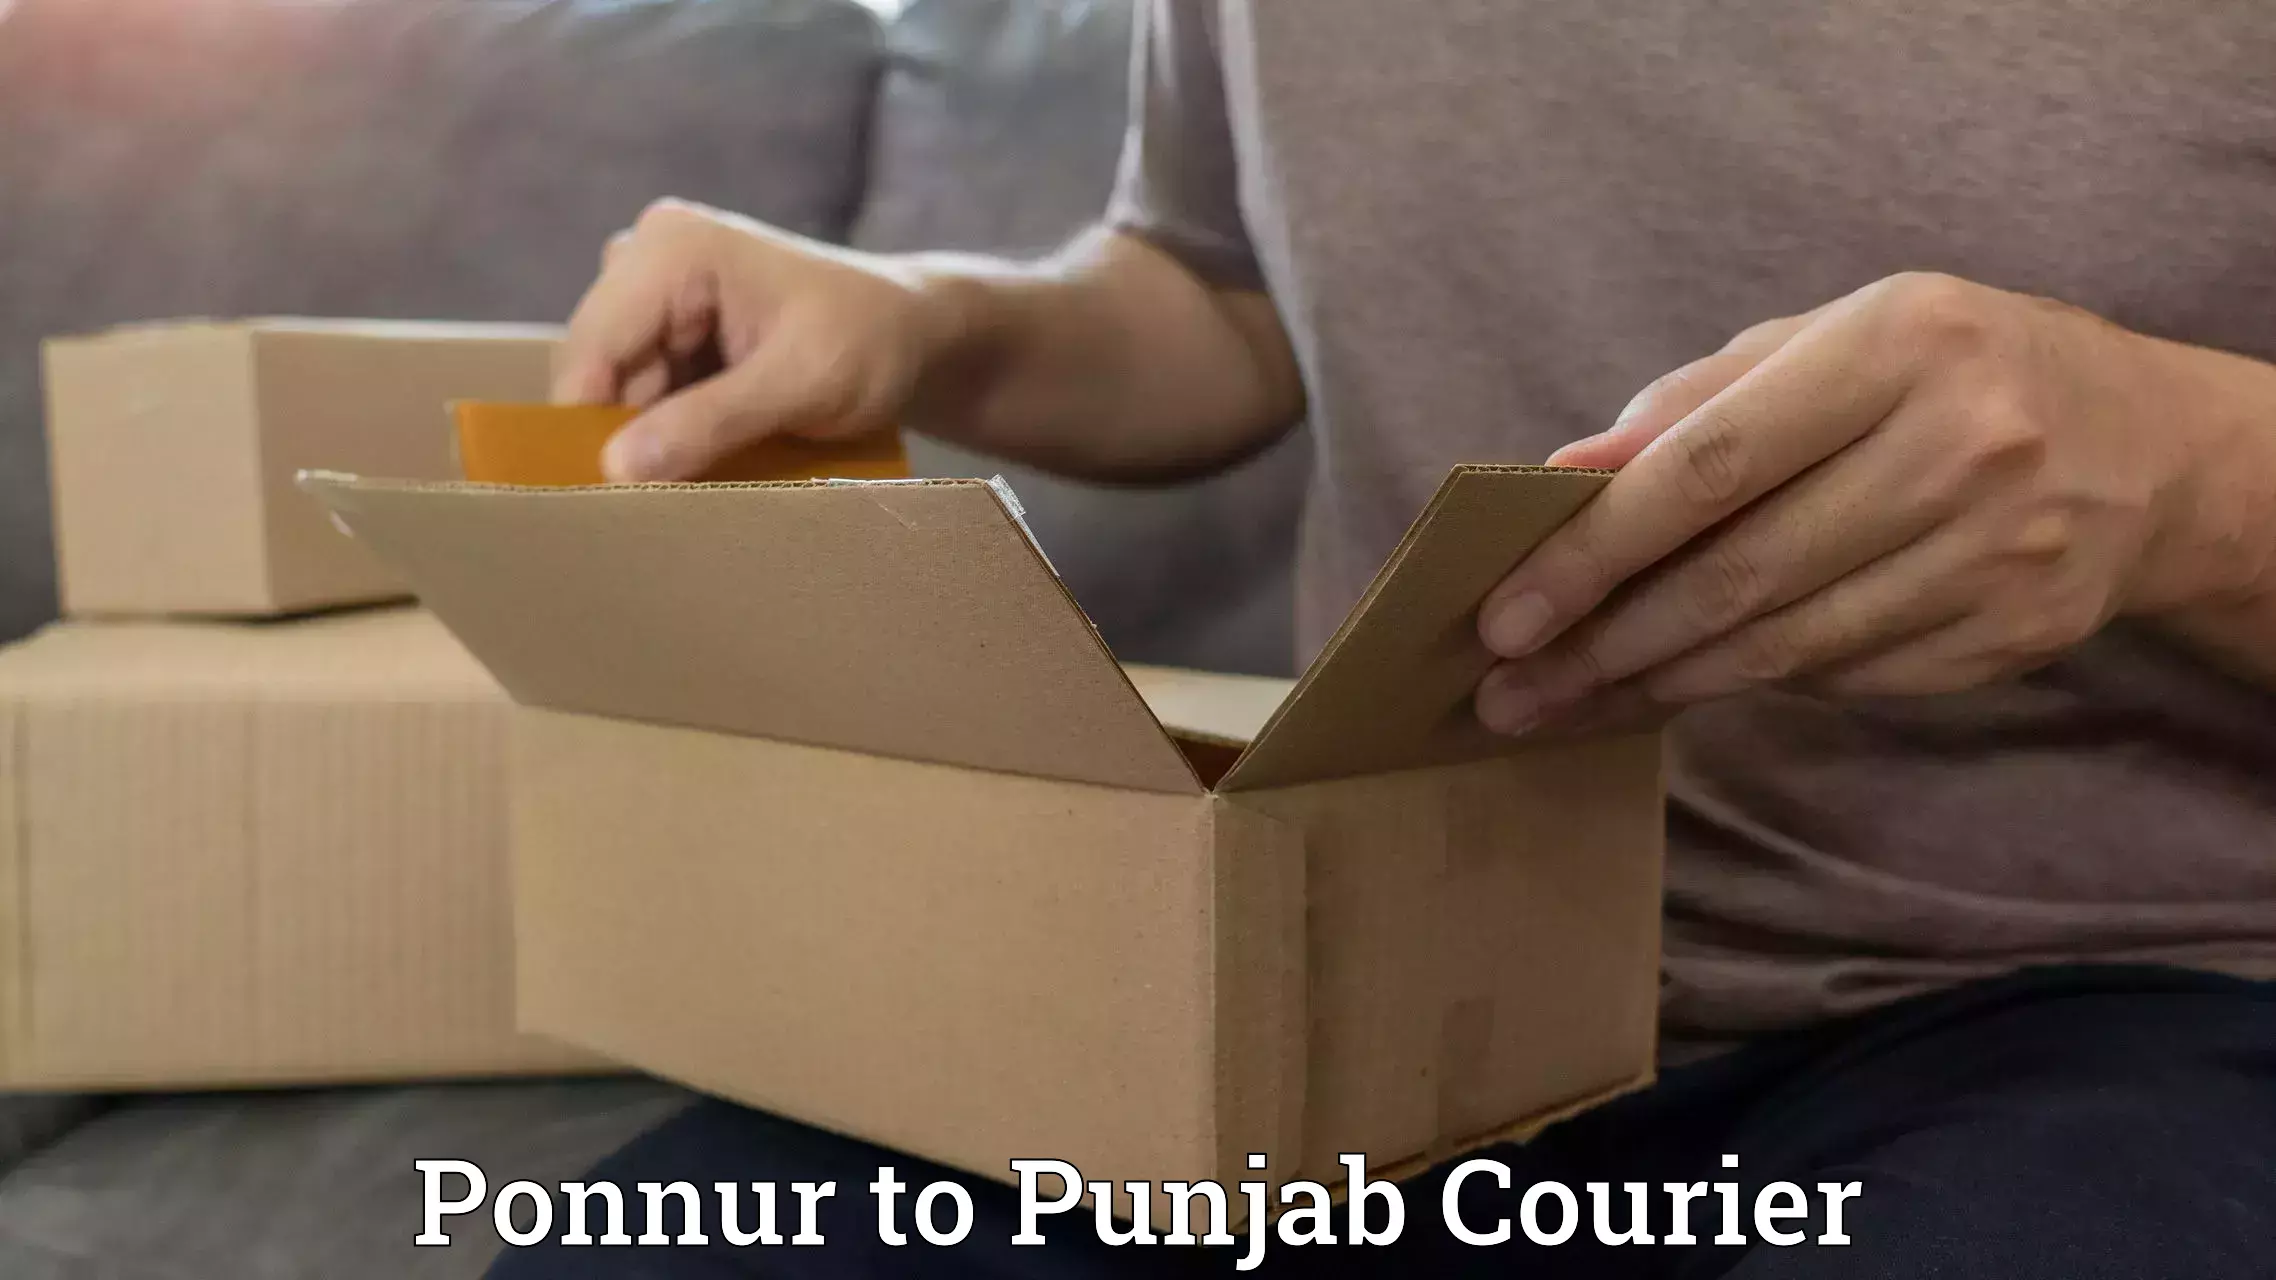 Subscription-based courier Ponnur to Amritsar